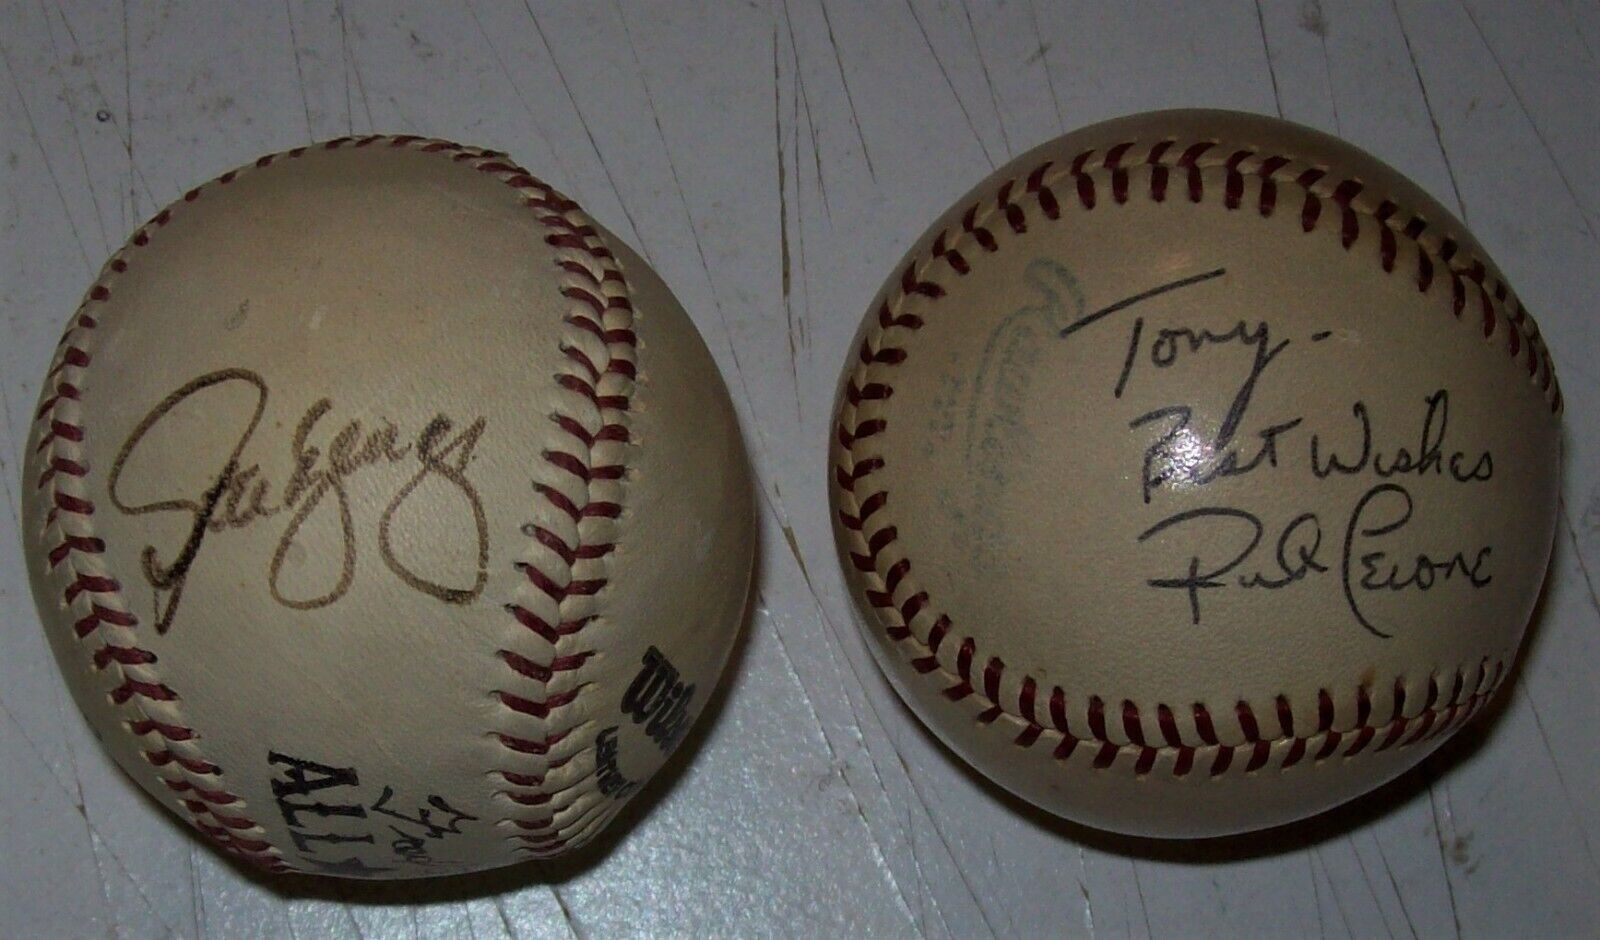 LOT OF 4 DIFF. AUTOGRAPHED BB's: S.YEAGER, R.ROBINSON; R.CERONE; D.ROZEMA Без бренда - фотография #2